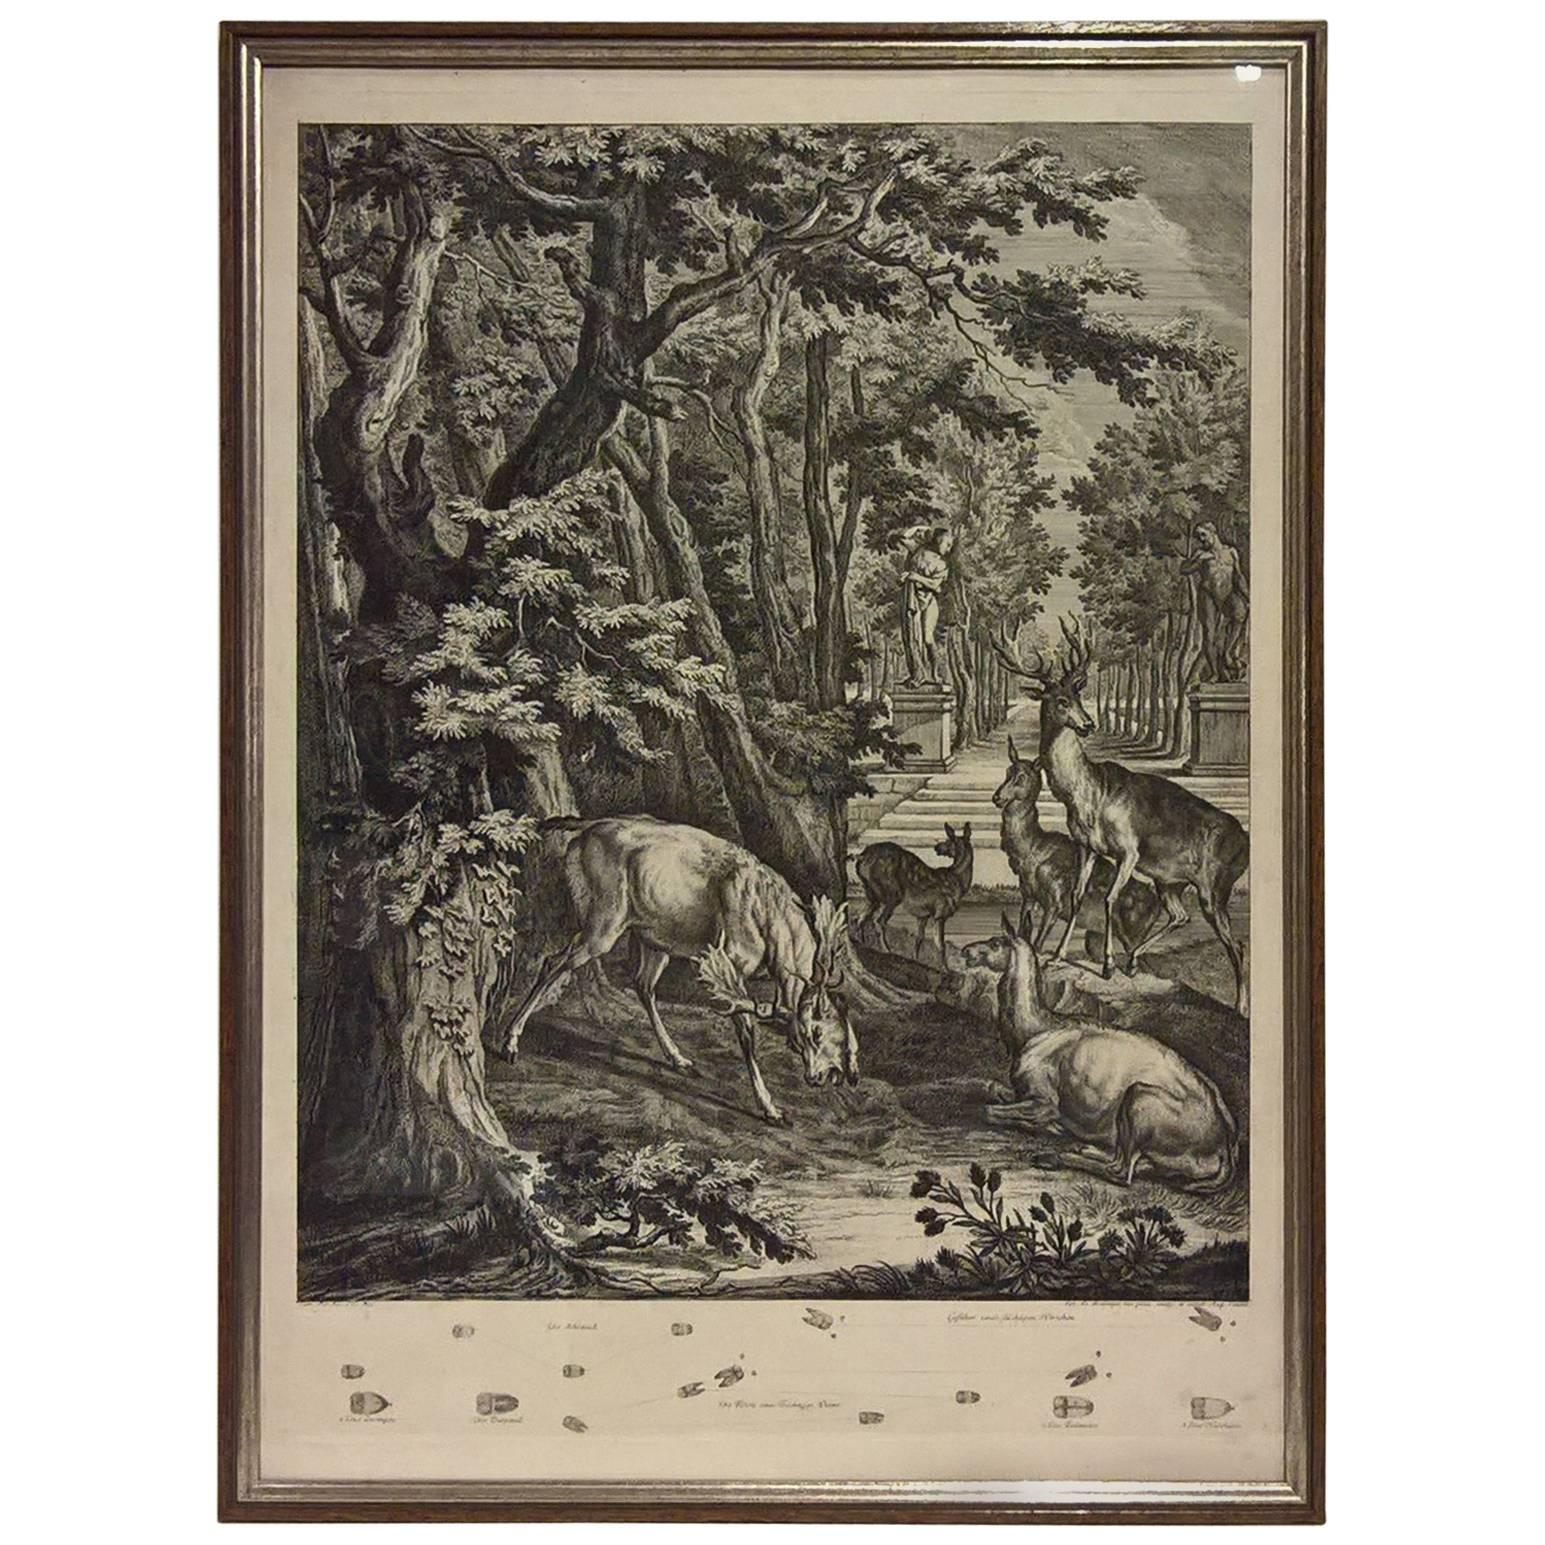 18th Century Black Forest Copperplate Johann Elias Ridinger with Hunting Scene